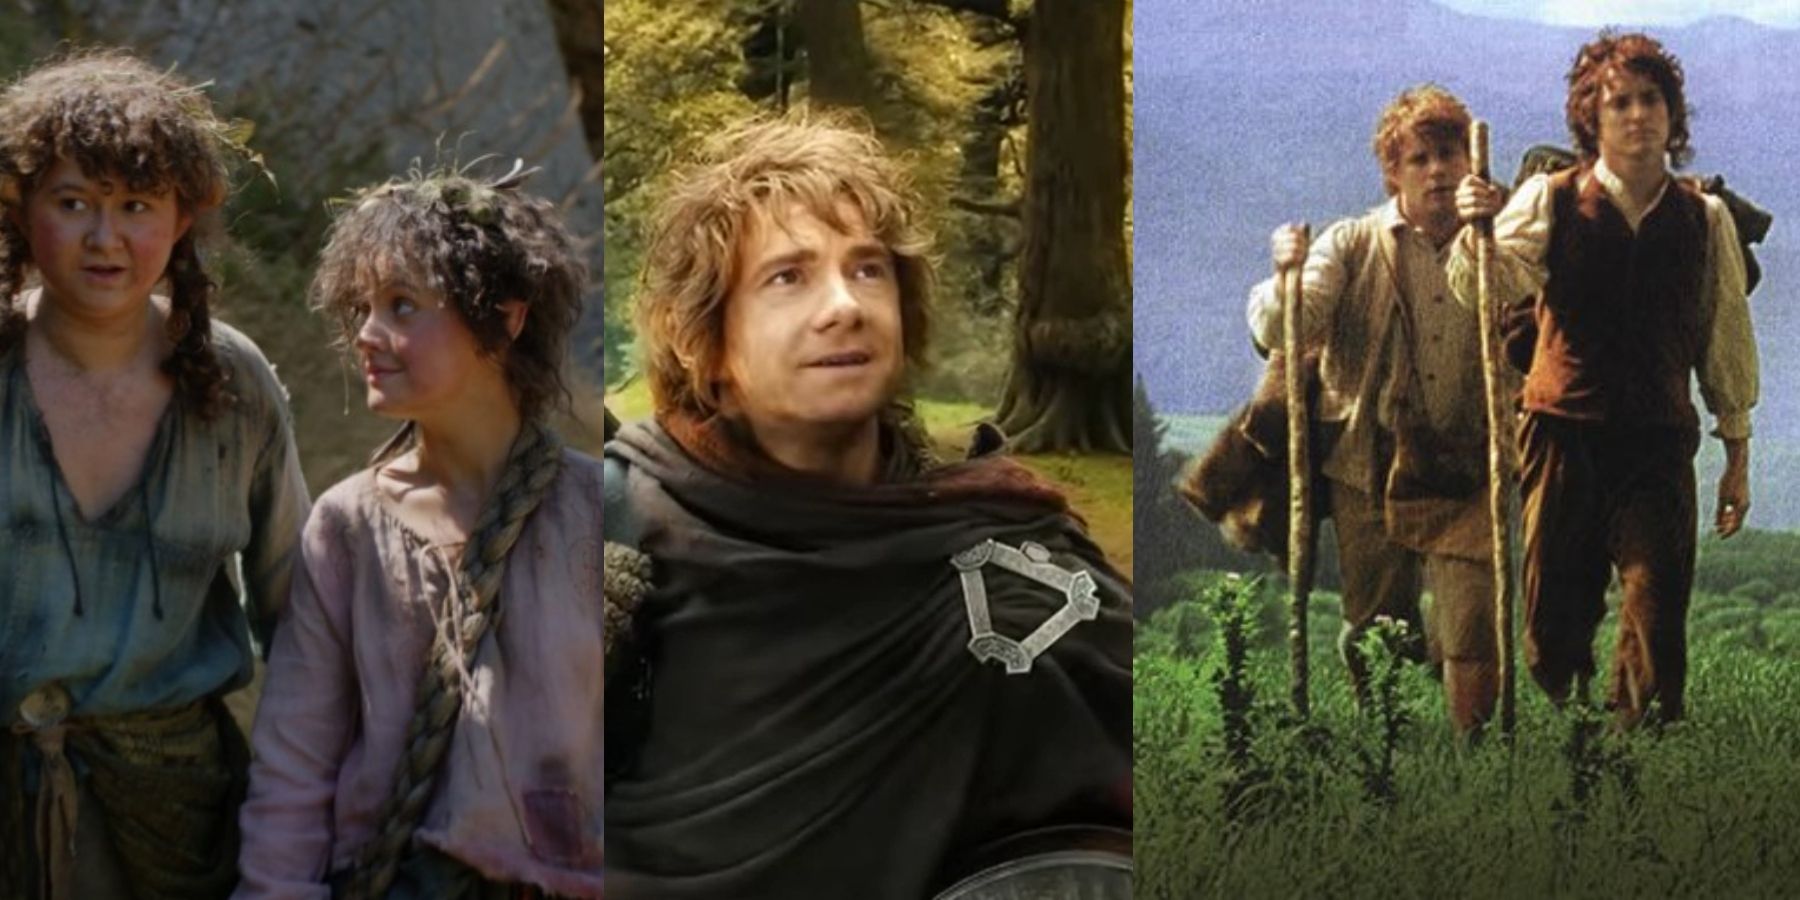 hobbits in rings of power, the hobbit, and LOTR